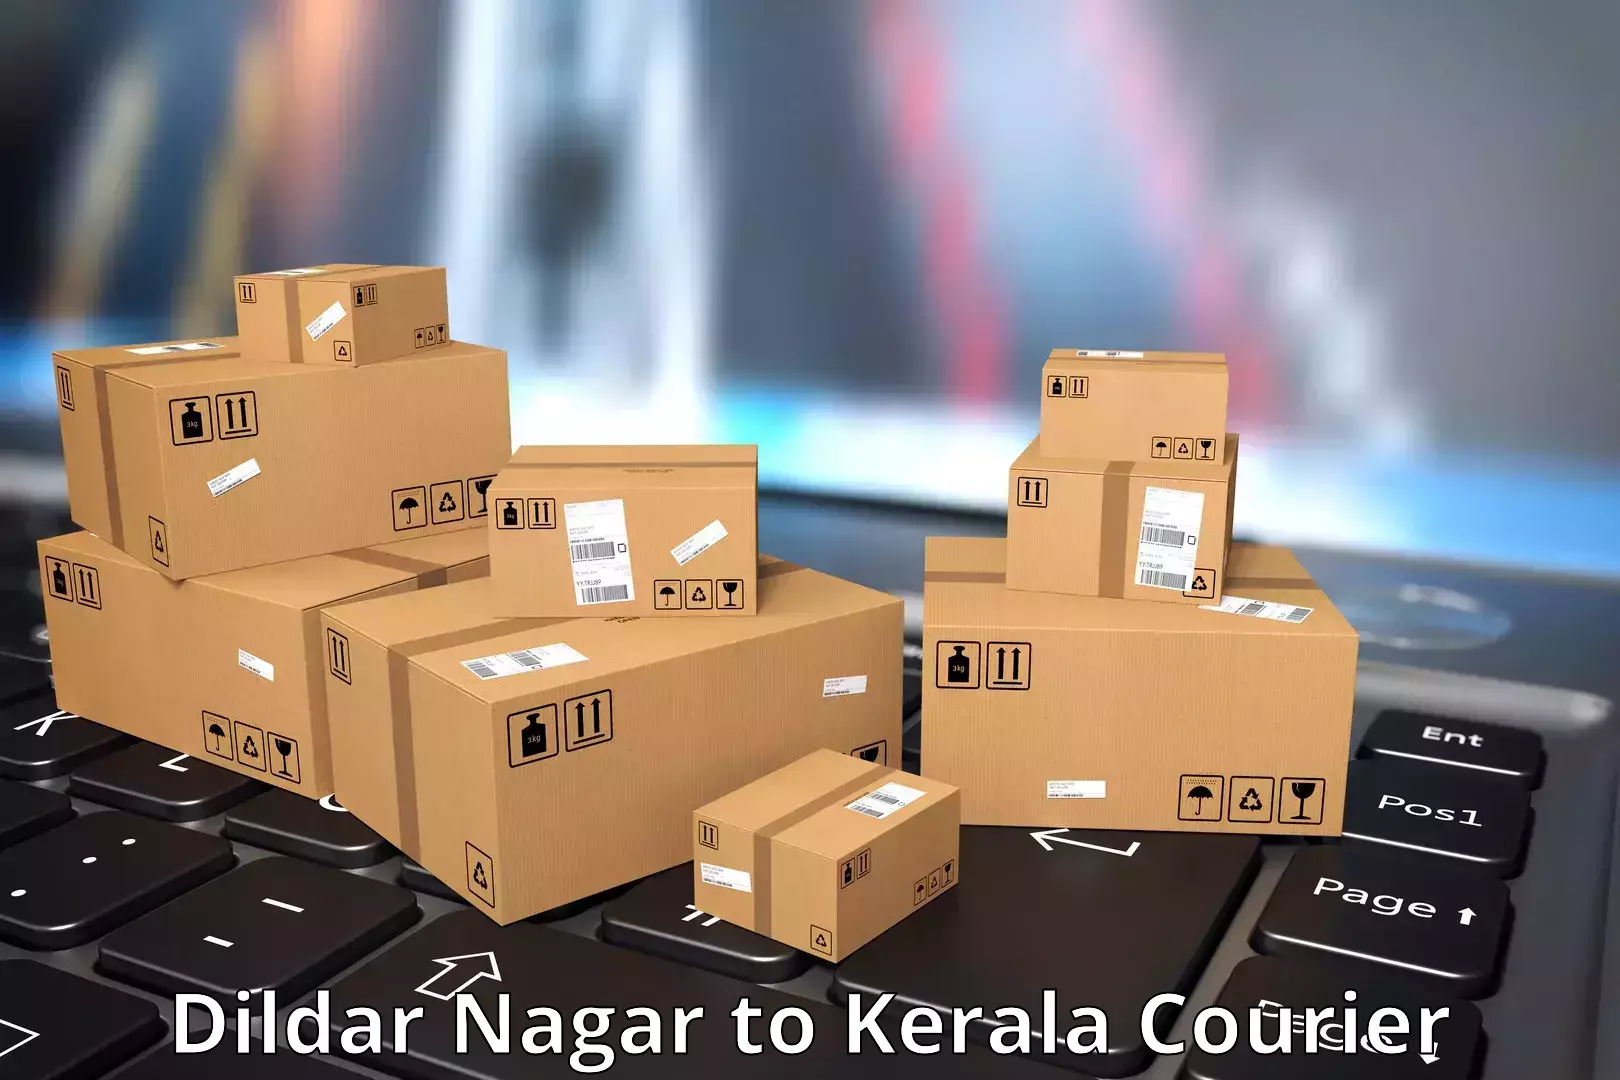 Flexible delivery schedules in Dildar Nagar to Kerala